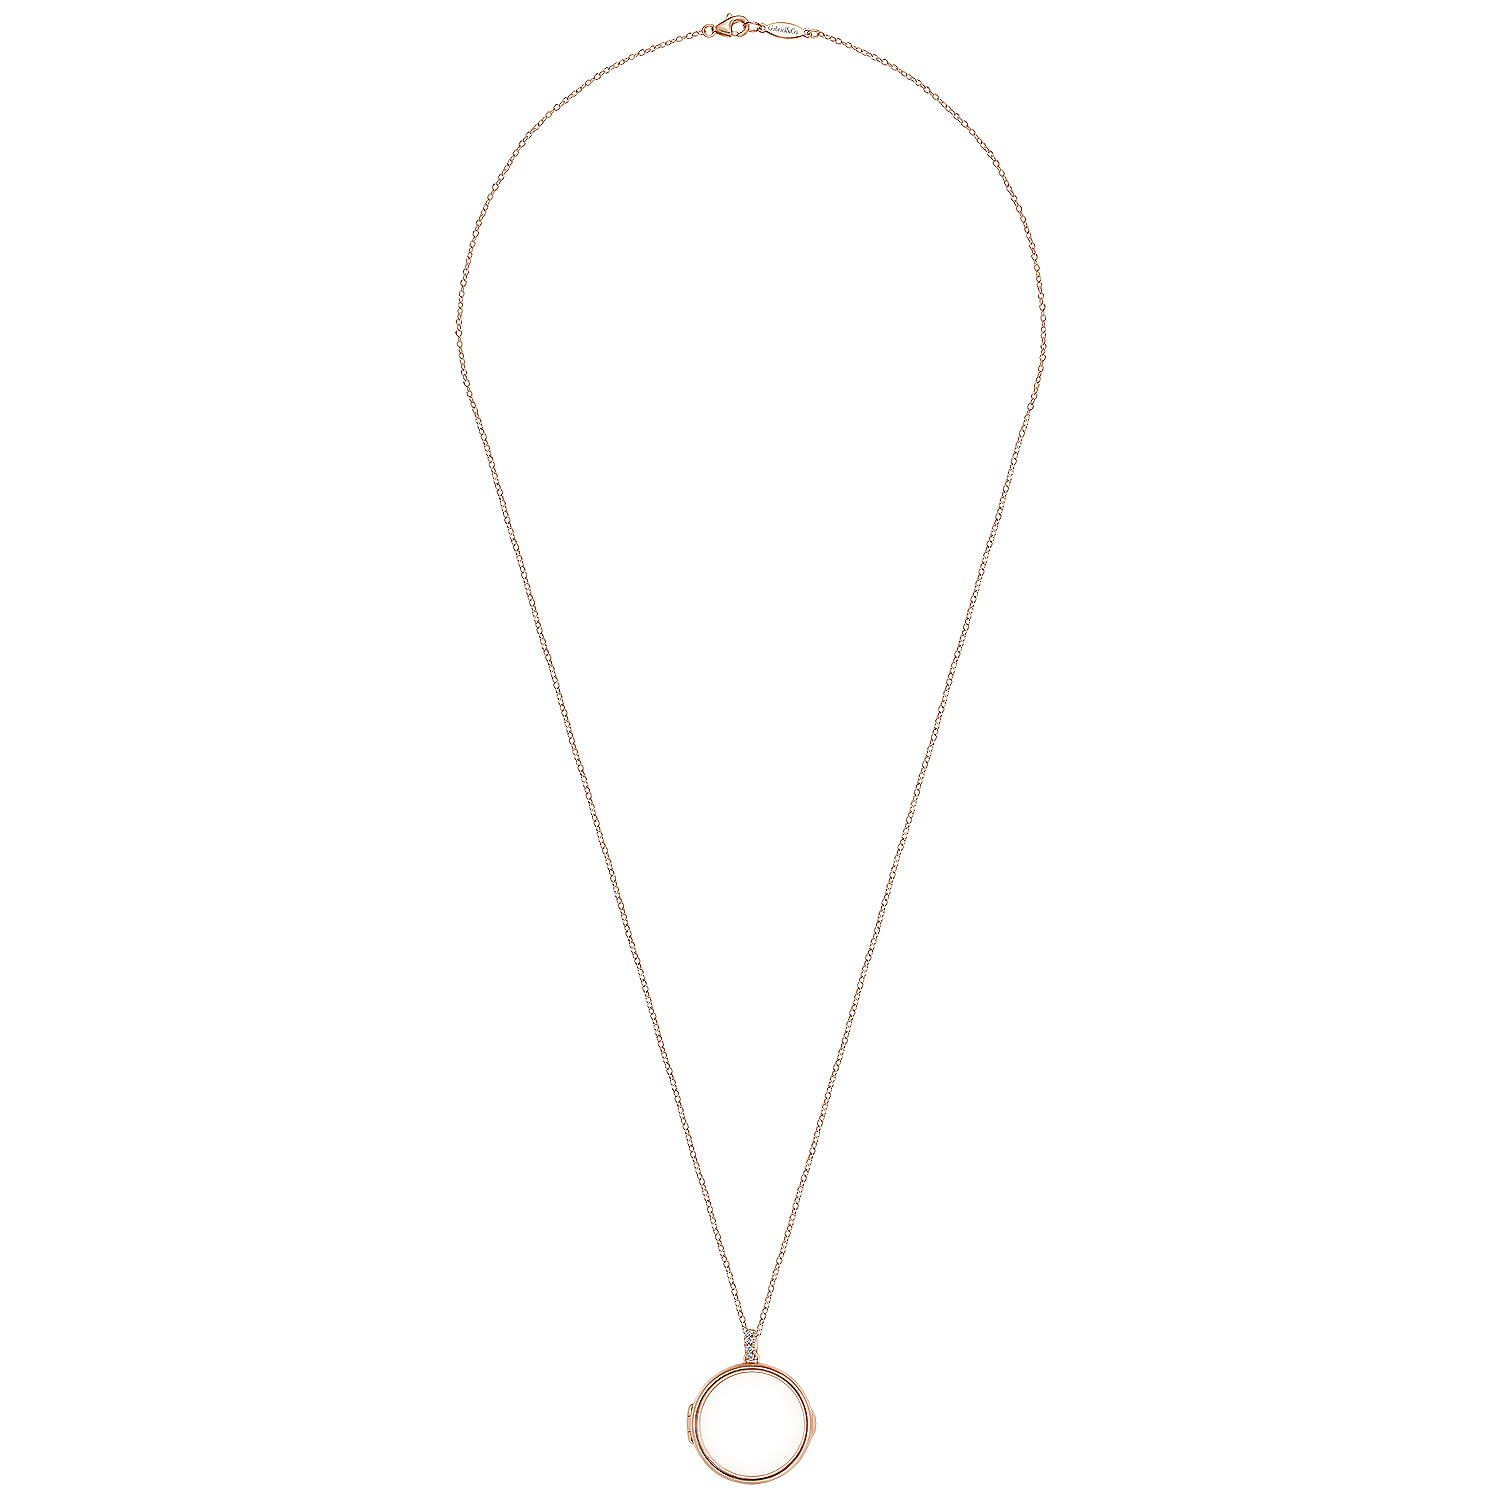 25 inch 14K Rose Gold Round Glass Front Locket Necklace